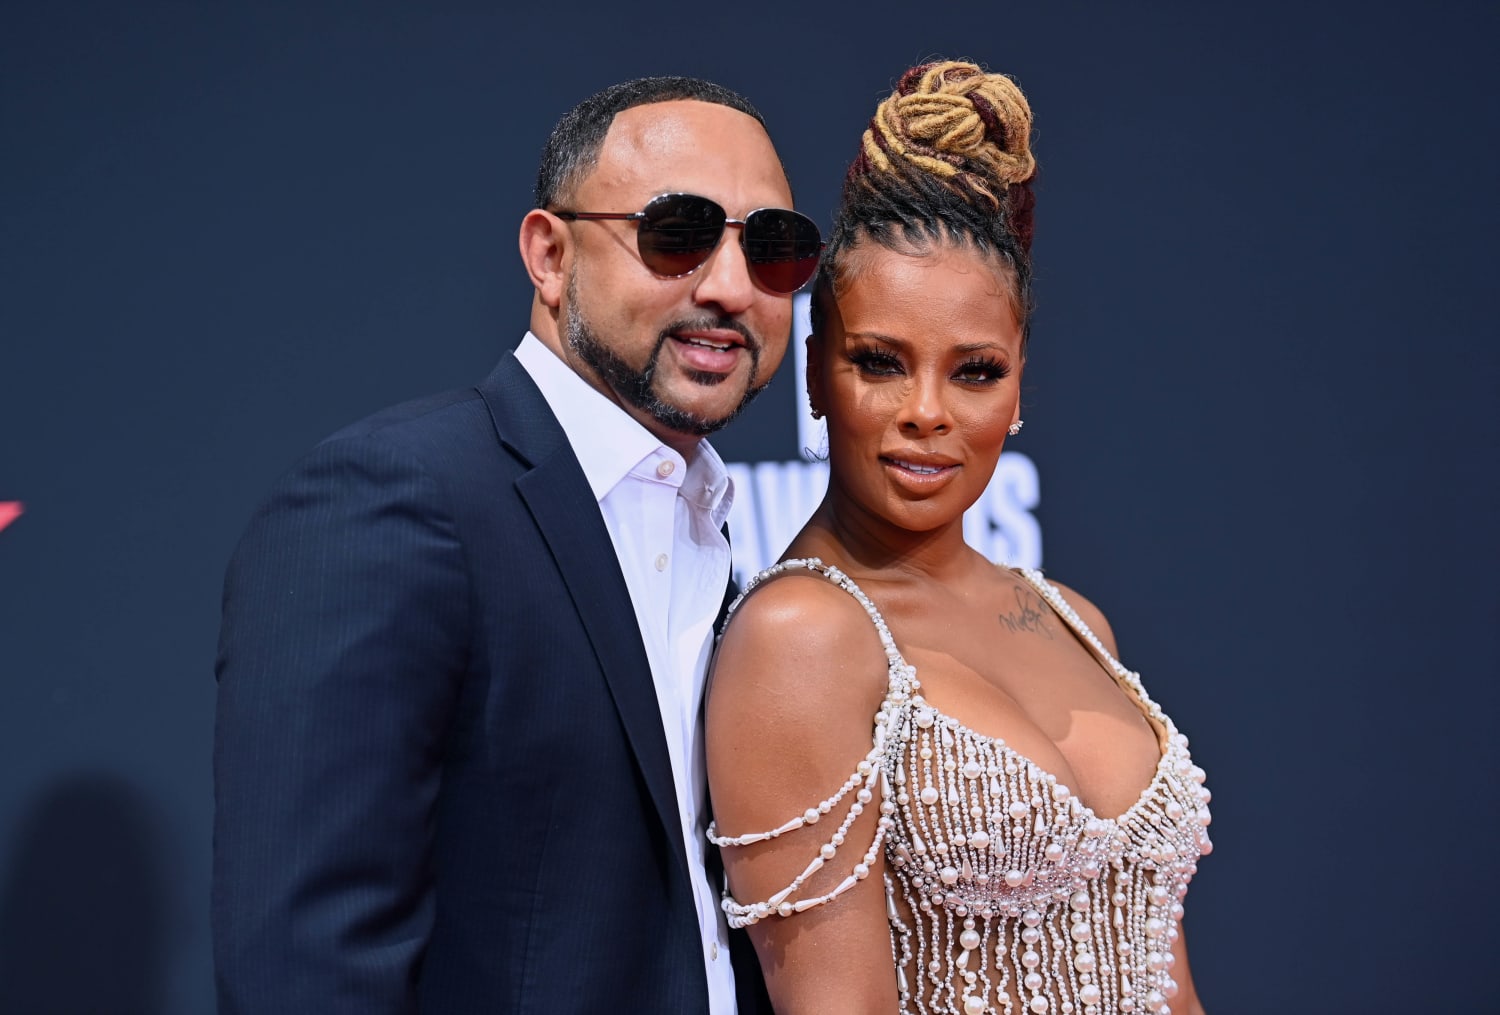 Real Housewives' star Eva Marcille Files For Divorce From Husband Michael  Sterling